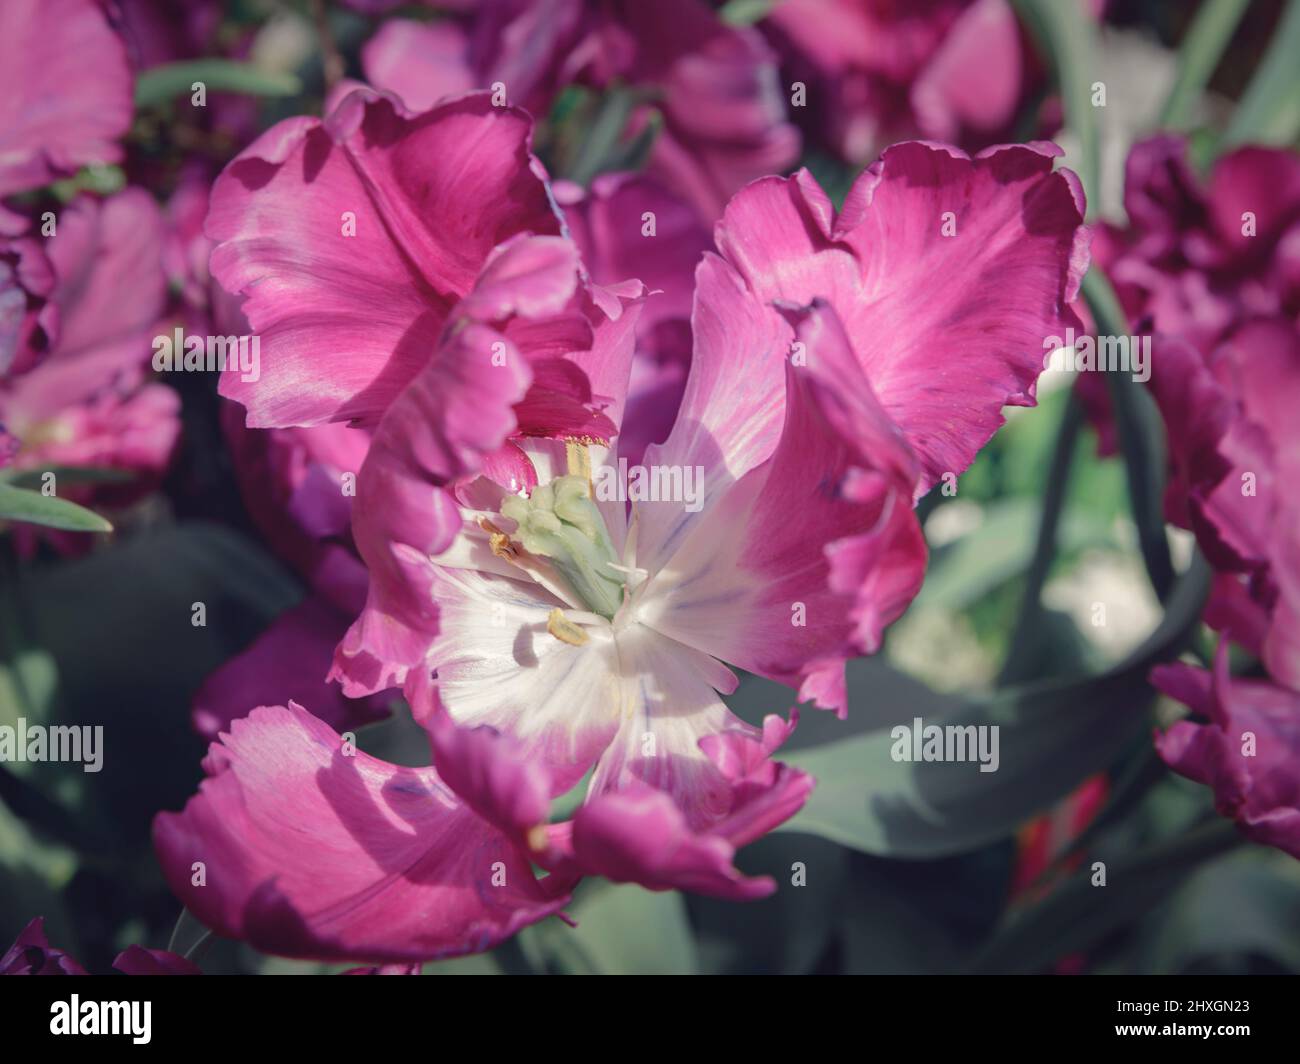 Delicate pink tulips in the garden on a natural green background. Selective soft focus. Pink tulips in spring nature for card design and web banner. Stock Photo